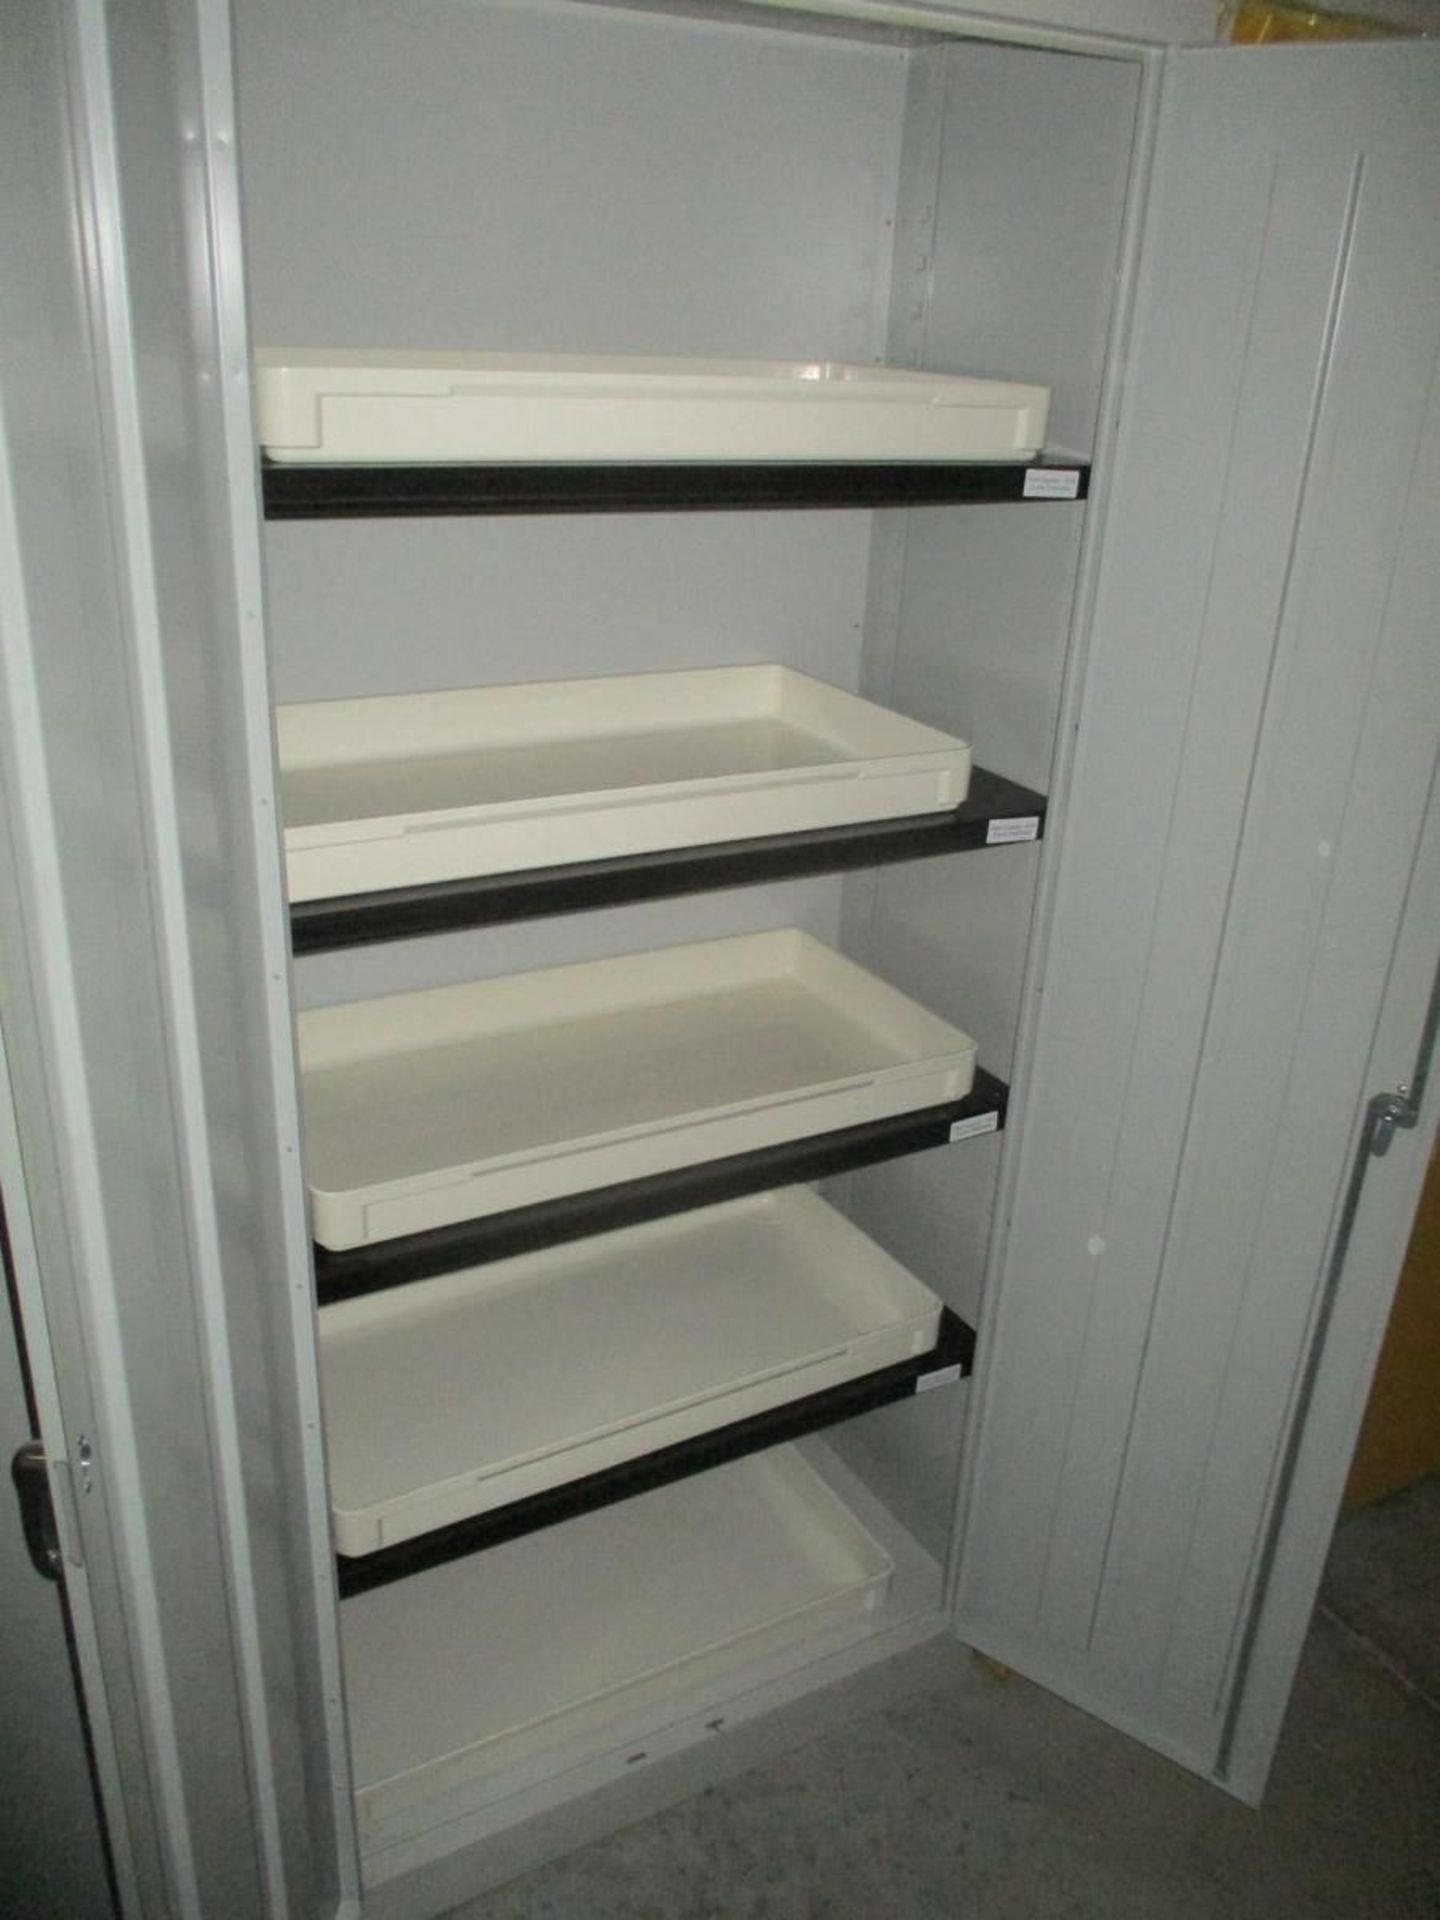 36"" W x 18"" D x 78"" H Steel Storage Cabinets - Image 8 of 8